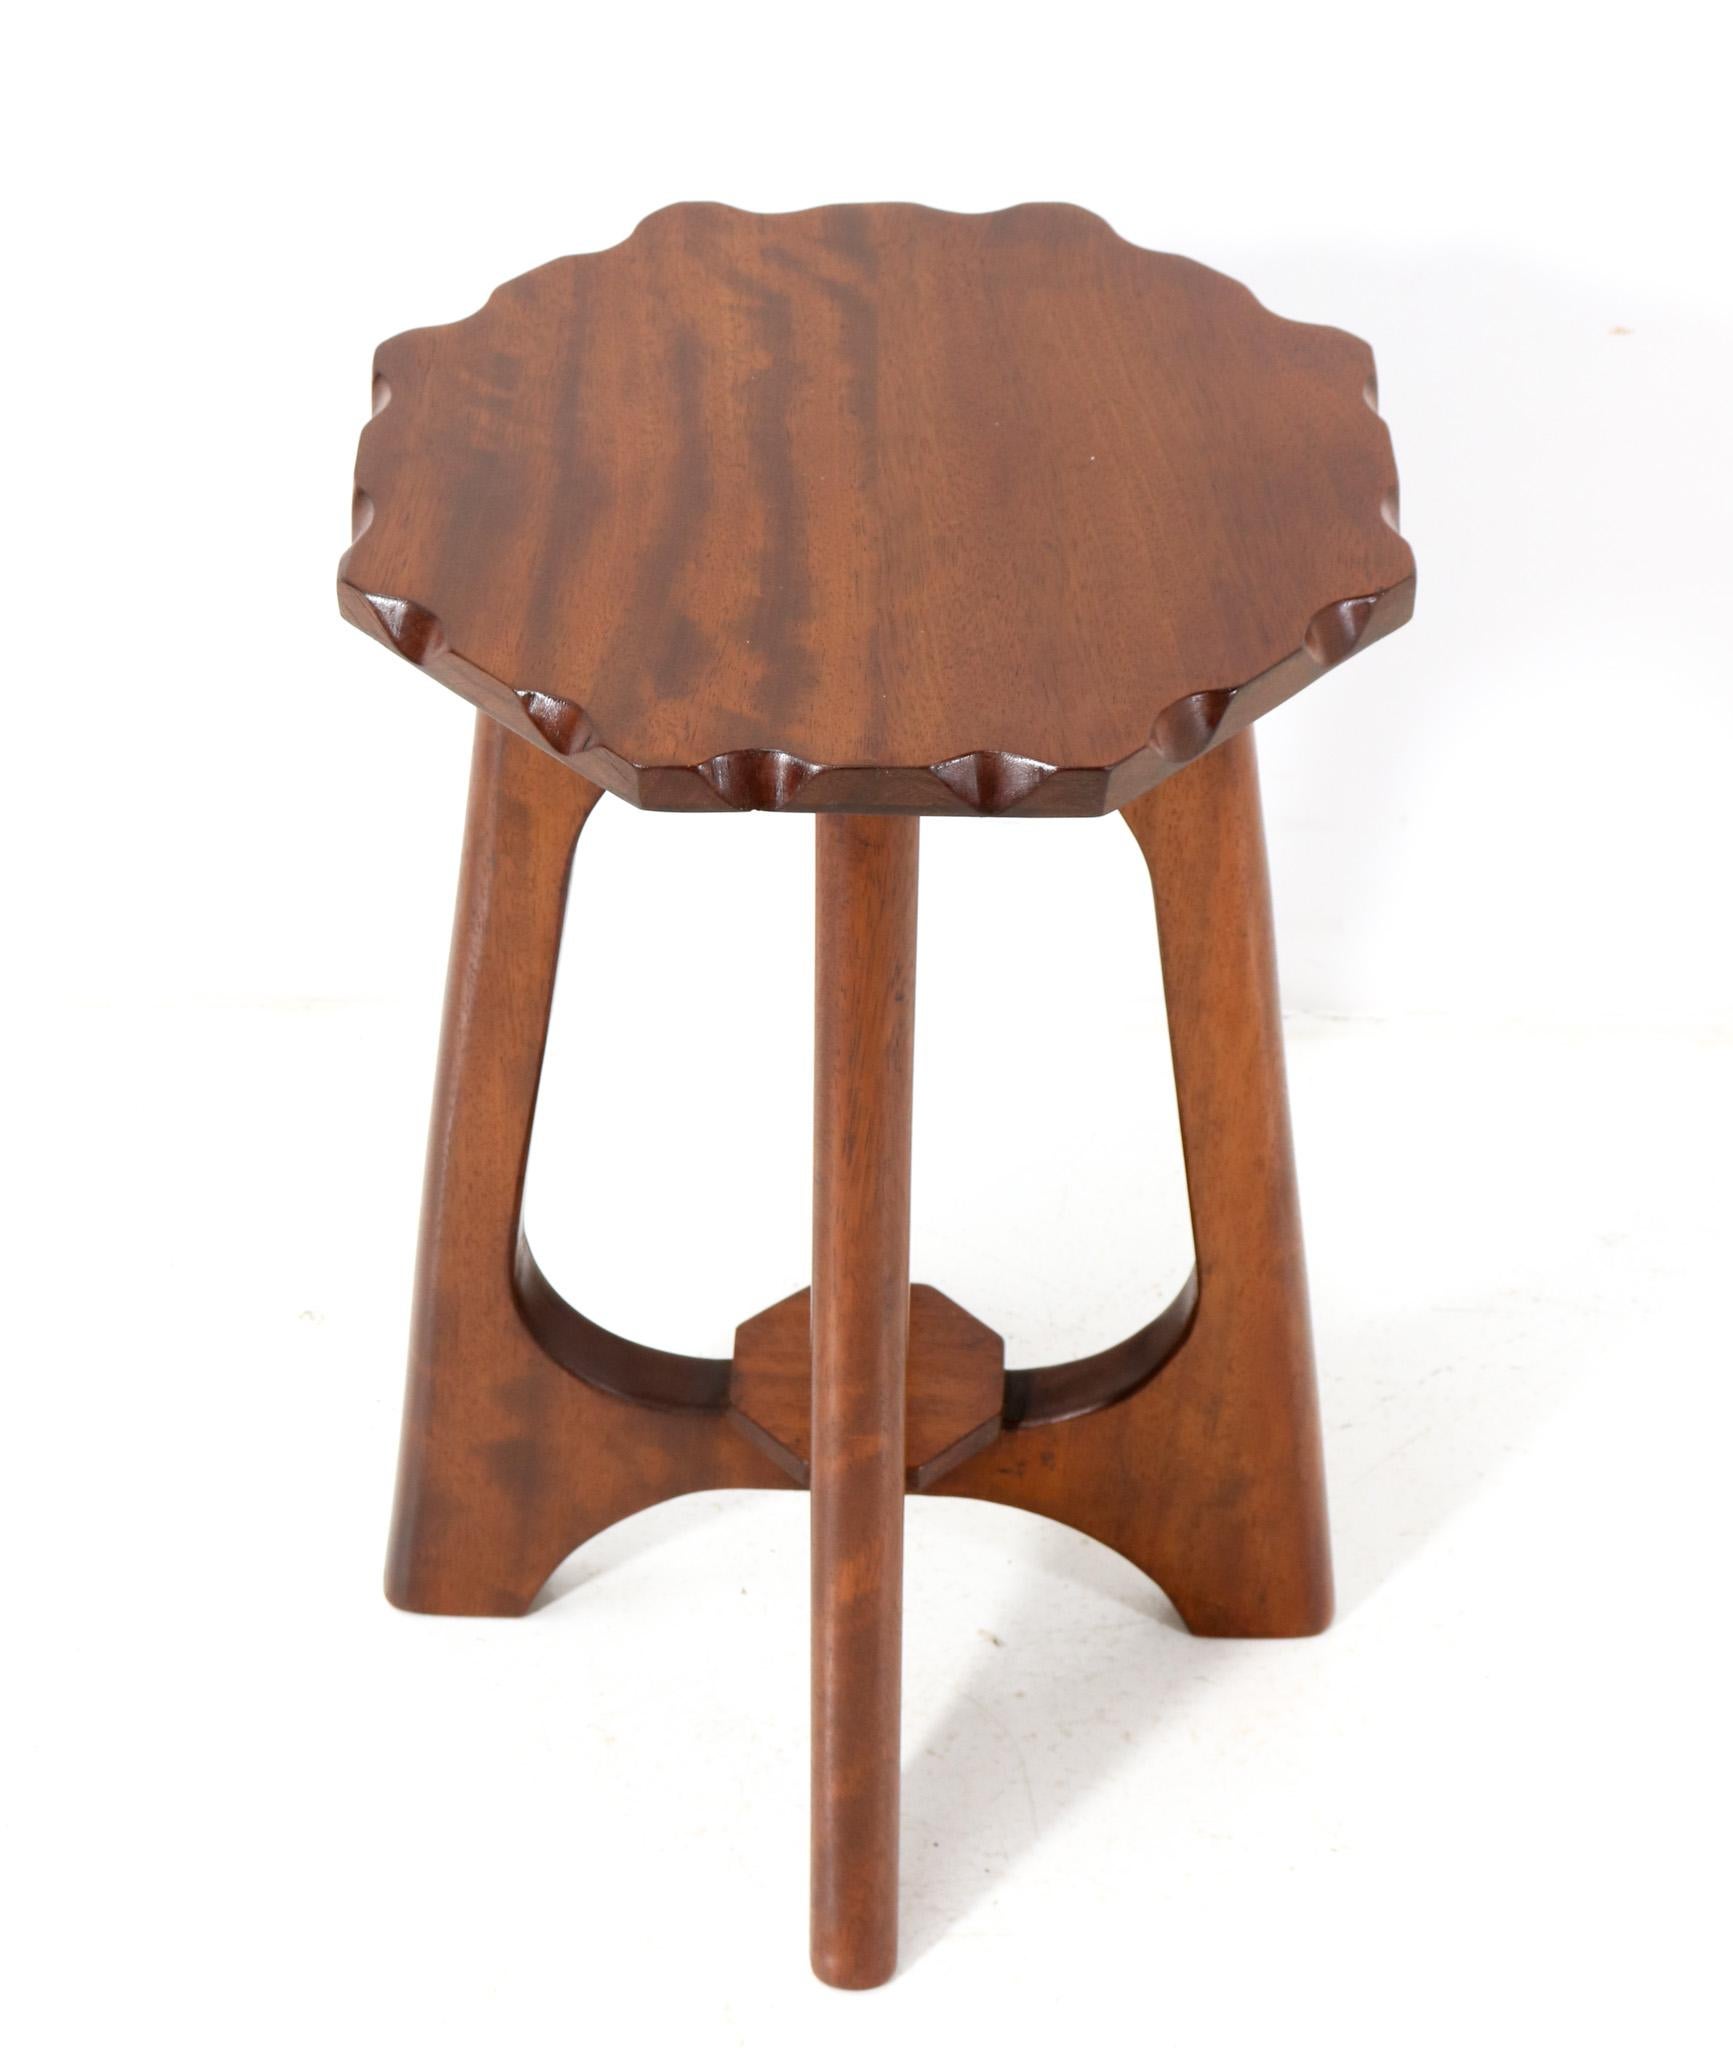 Magnificent and rare Art Deco Amsterdamse School side table.
Design by Louis Deen.
Striking Dutch design from the 1920s.
Solid walnut base with original solid walnut curved top.
This wonderful Art Deco Amsterdamse School side table by Louis Deen